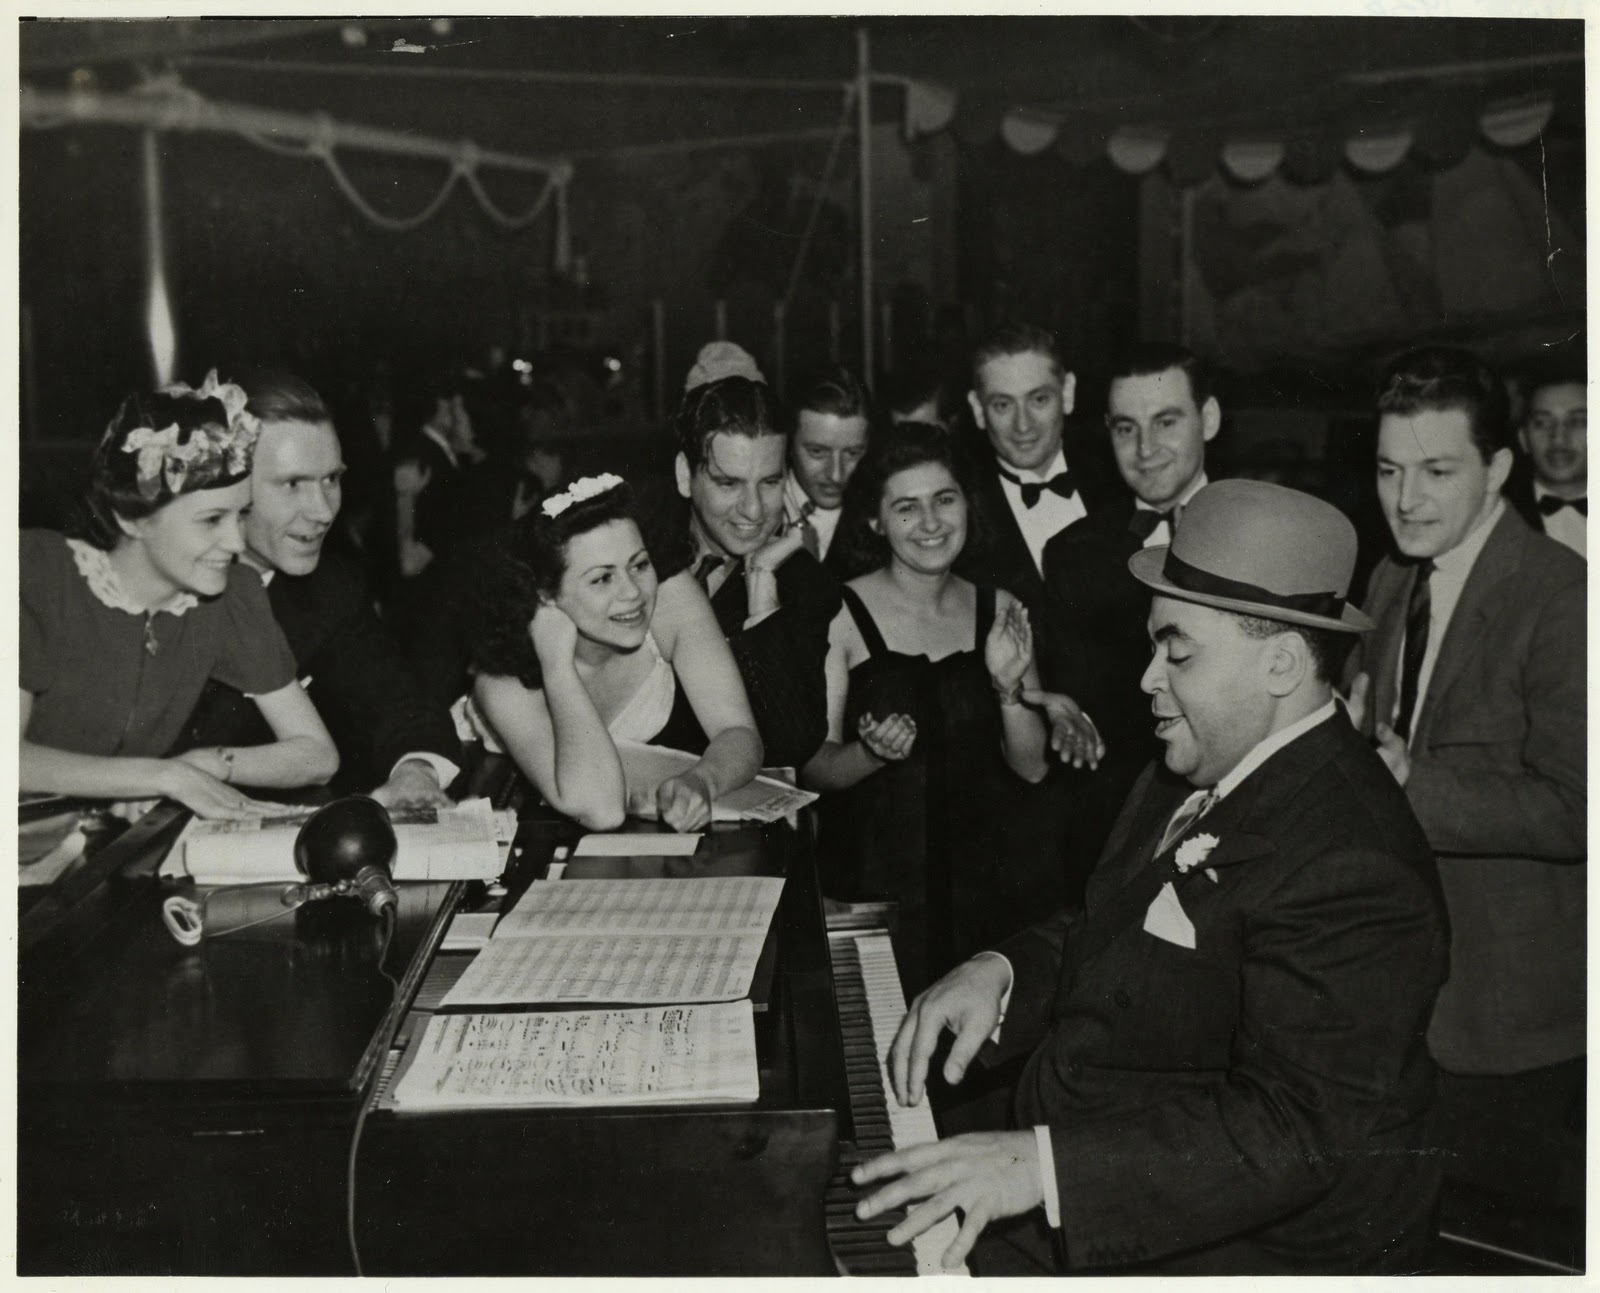 Fats Waller at the Yacht Club NYC October 1938